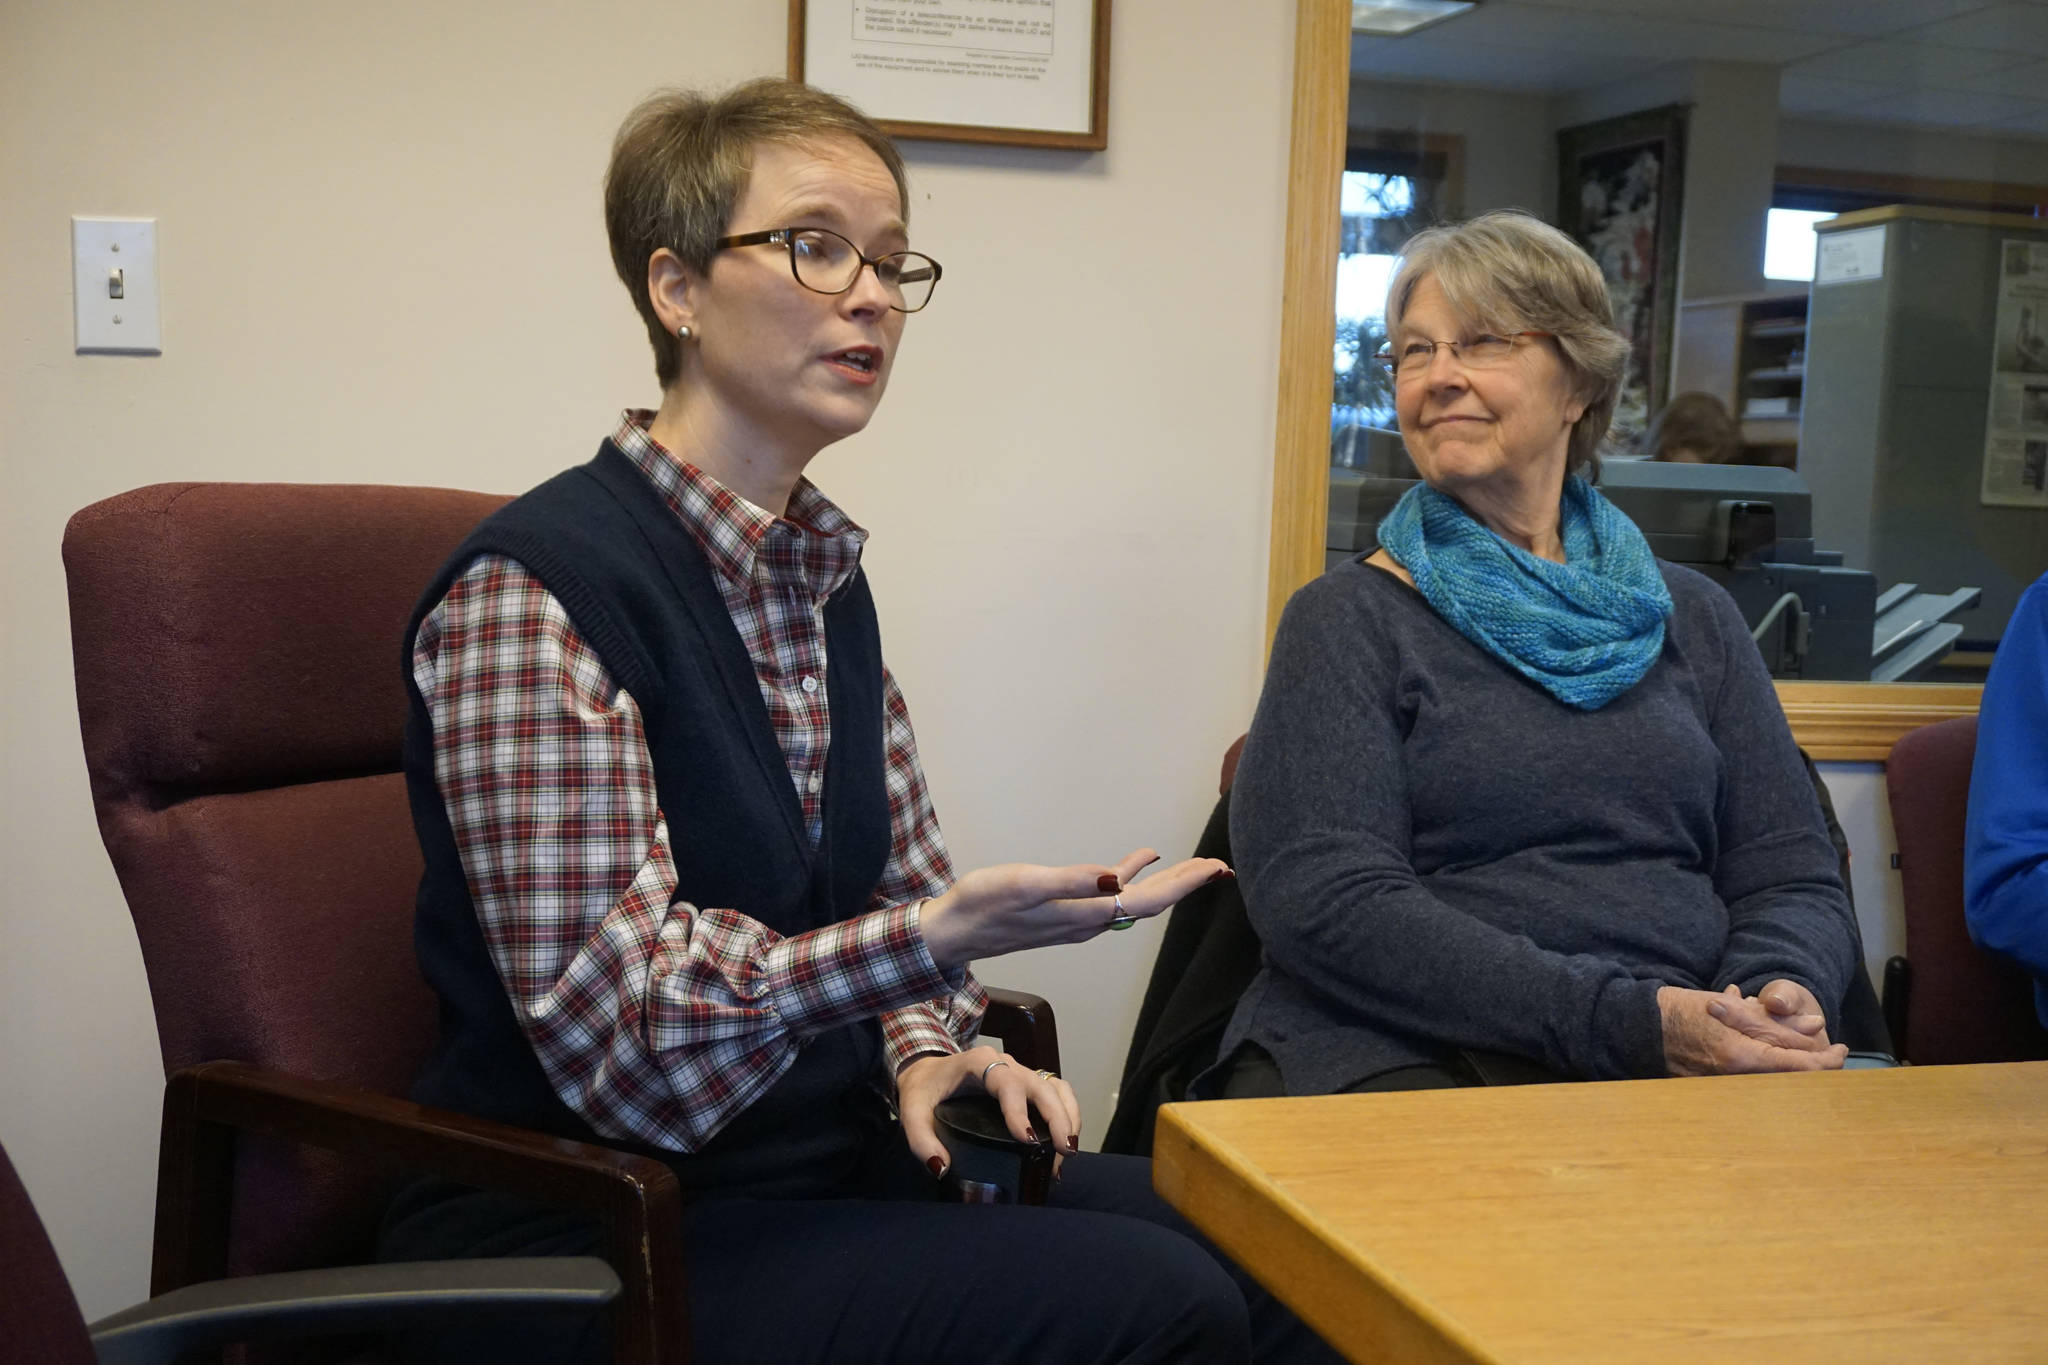 <span class="neFMT neFMT_PhotoCredit">Photo by Michael Armstrong/Homer News</span>                                Rep.-elect Sarah Vance, R-Homer, speaks at a meeting on Thursday, Jan. 3, 2019, at the Homer Legislative Information Office in Homer, Alaska. Ardith Mumma, right, listens. As she headed to Juneau for the next session of the Alaska Legislature, Vance held meetings in Homer, Anchor Point, Ninilchik and Kasilof last weekend.